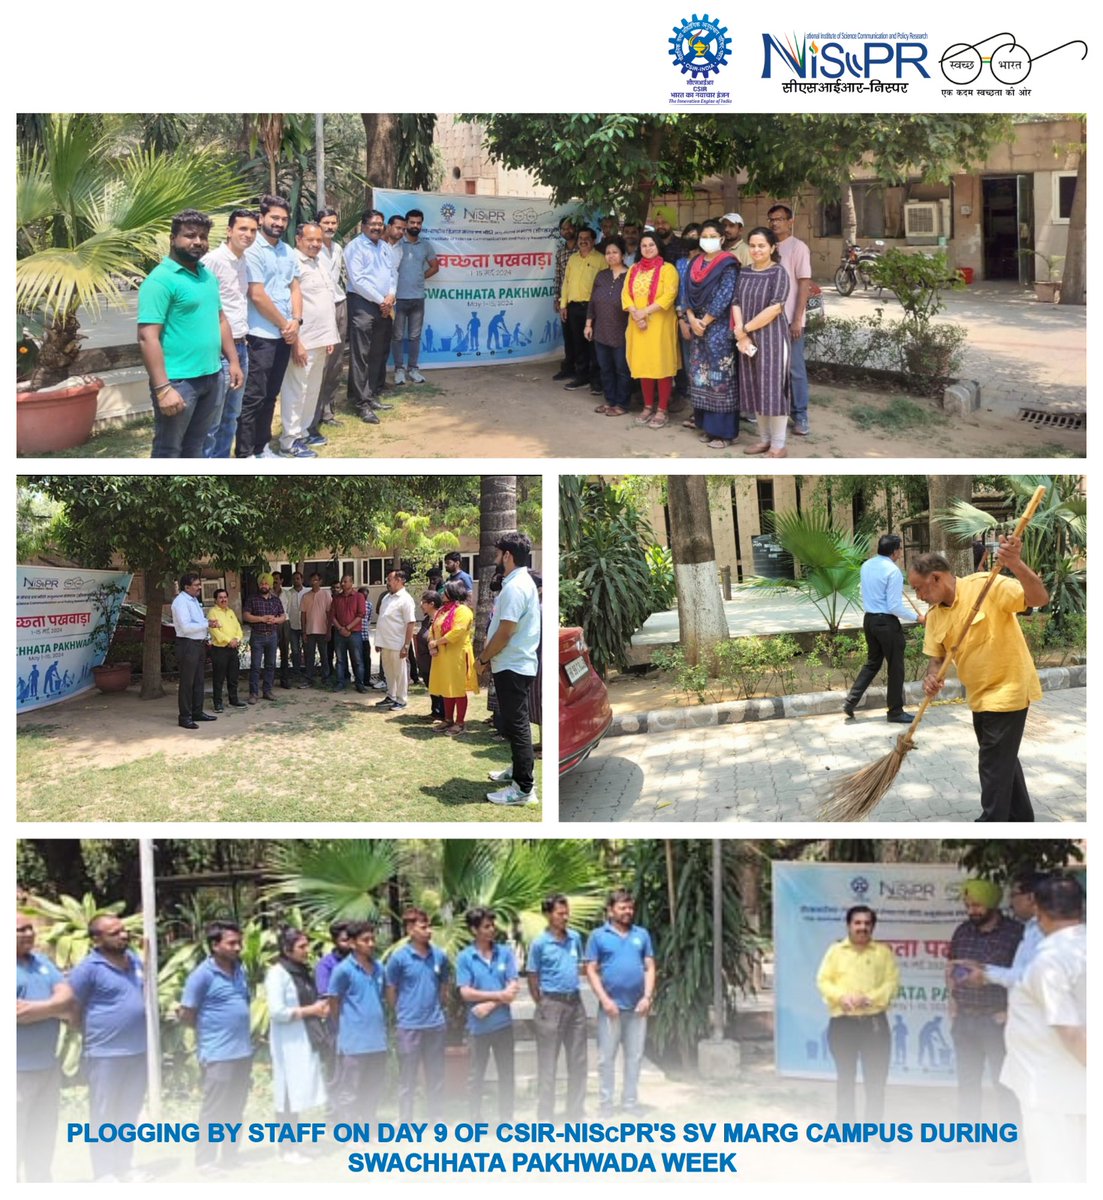 CSIR-NIScPR’s SV Marg Campus leads the charge in eco-consciousness with a plogging session! 🌿🏃 Ignite the change in this Swachhata Pakhwada week. #CleanlinessStartsWithYou #SwachhataPakhwada @CSIR_IND @Ranjana_23 @SMCC_NIScPR @AcSIR_India @NIScPR_SVASTIK